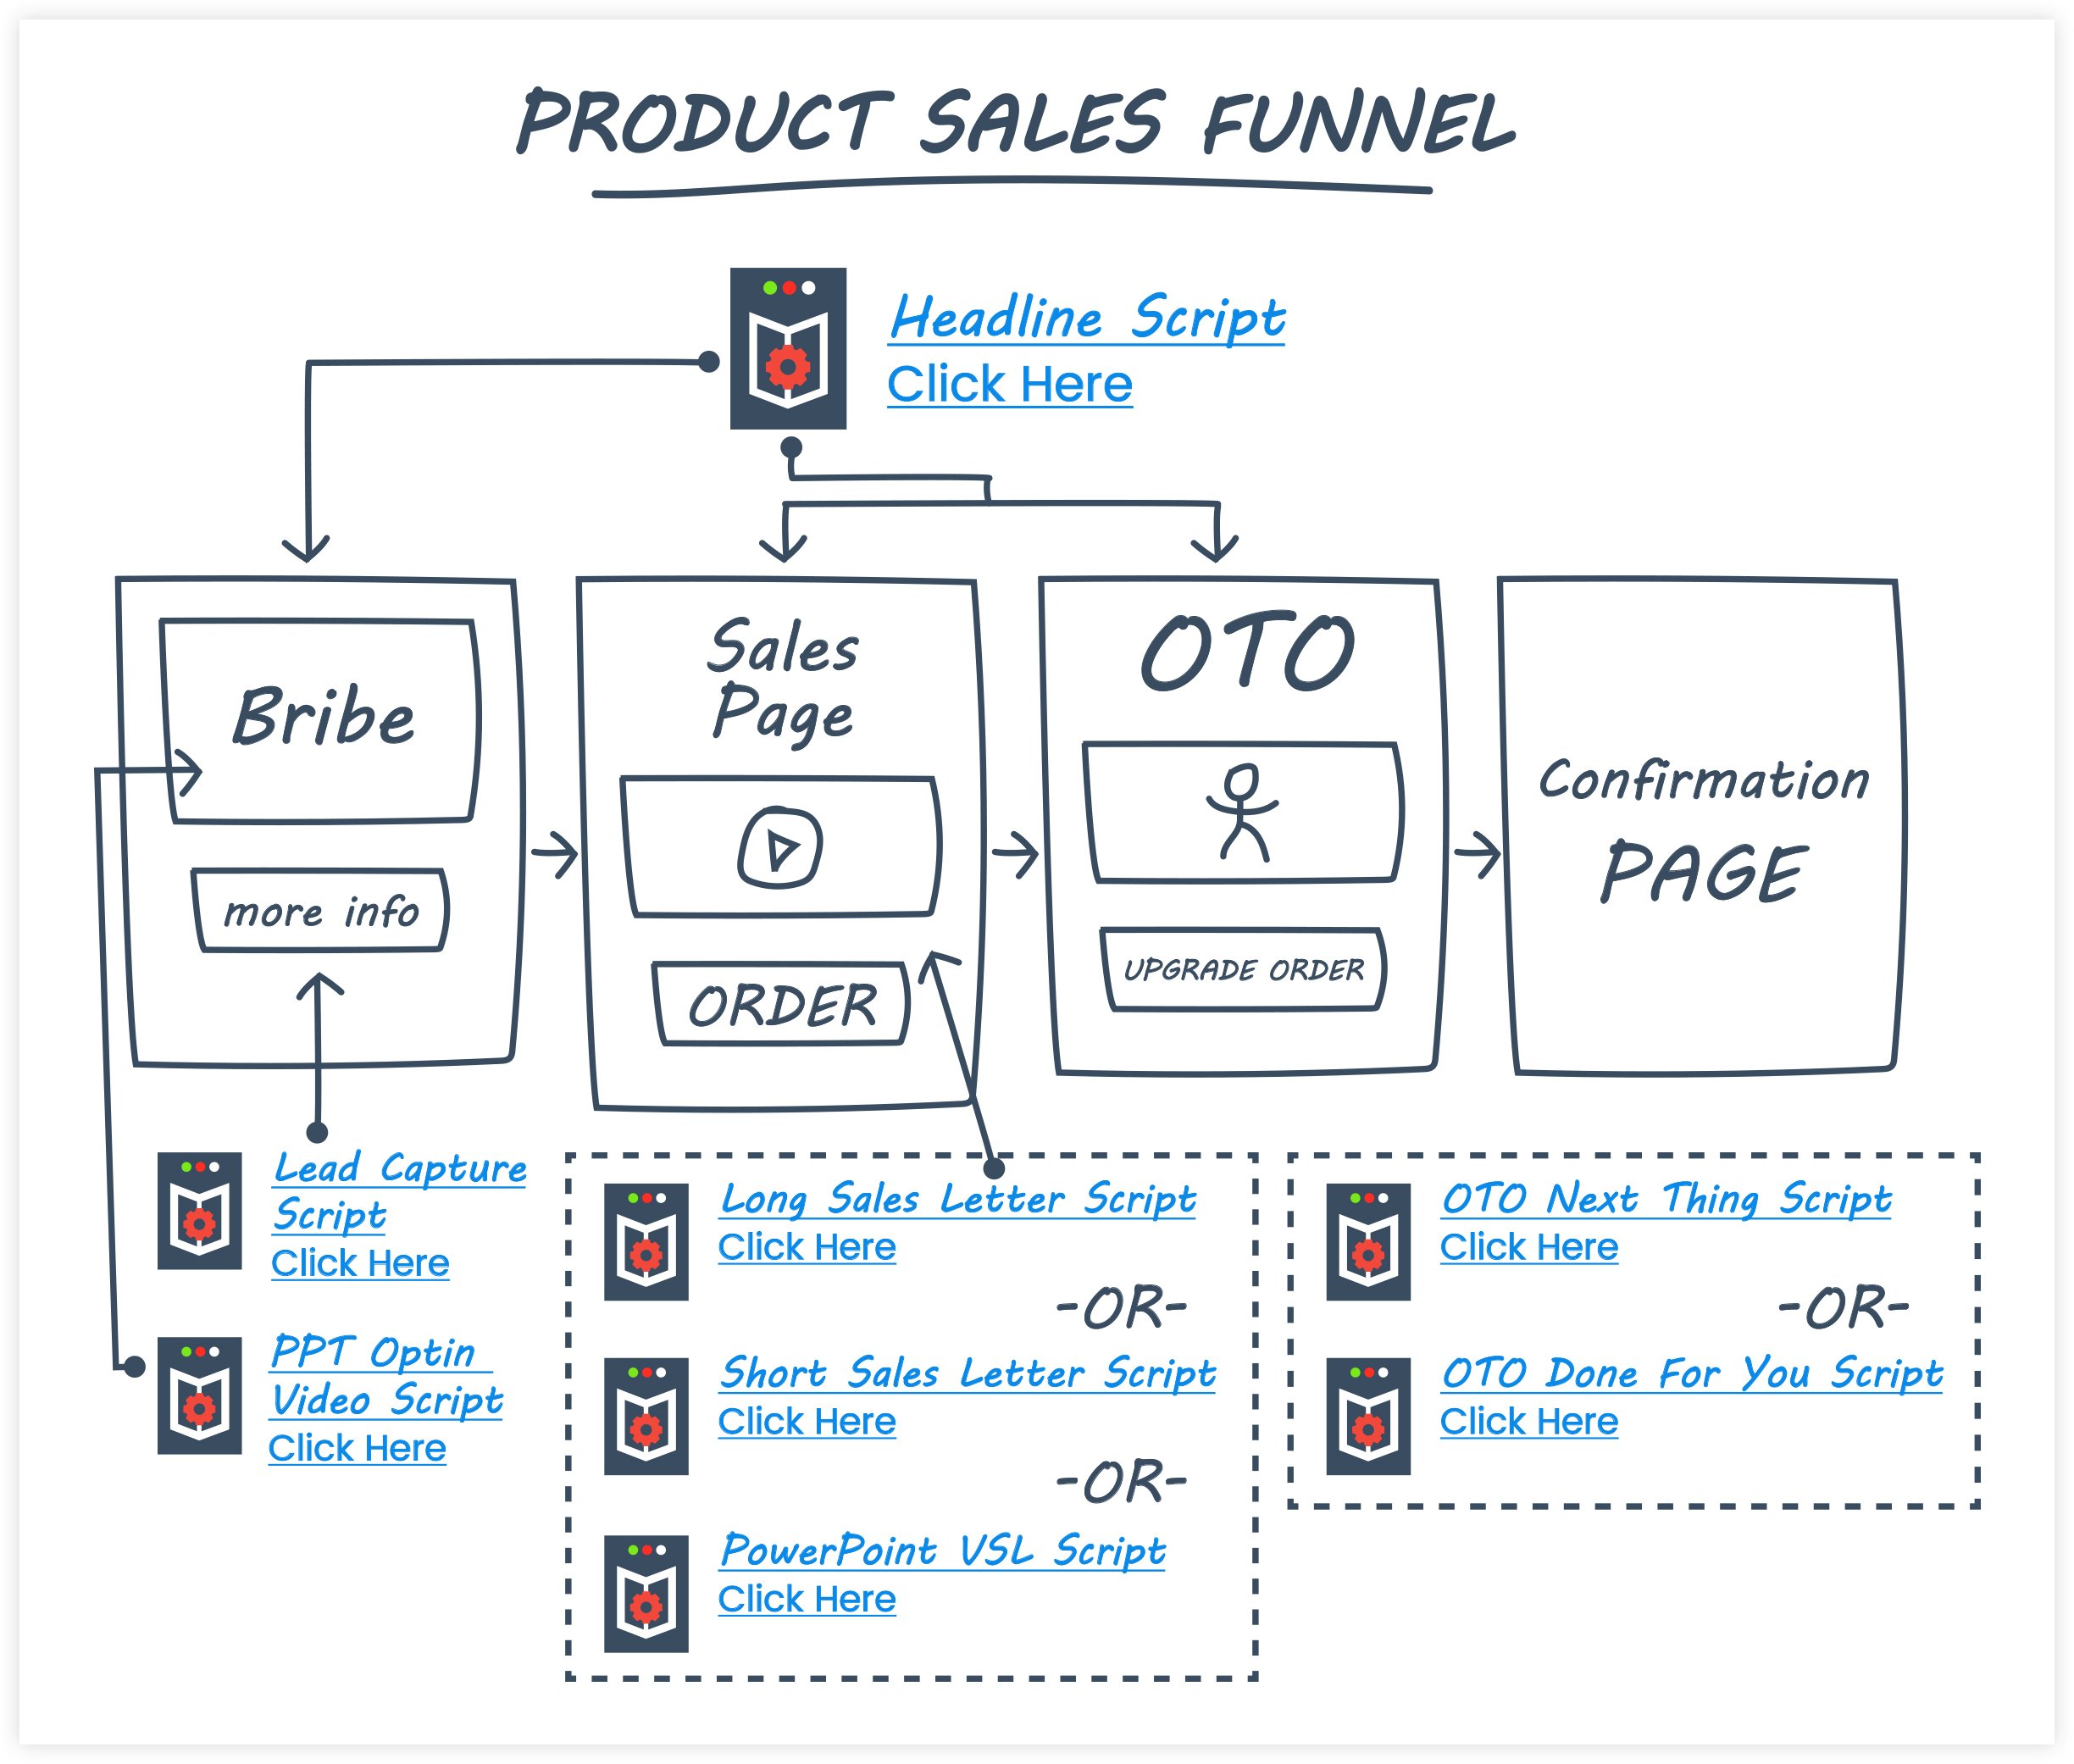 ClickFunnels Product Sales Funnel Example